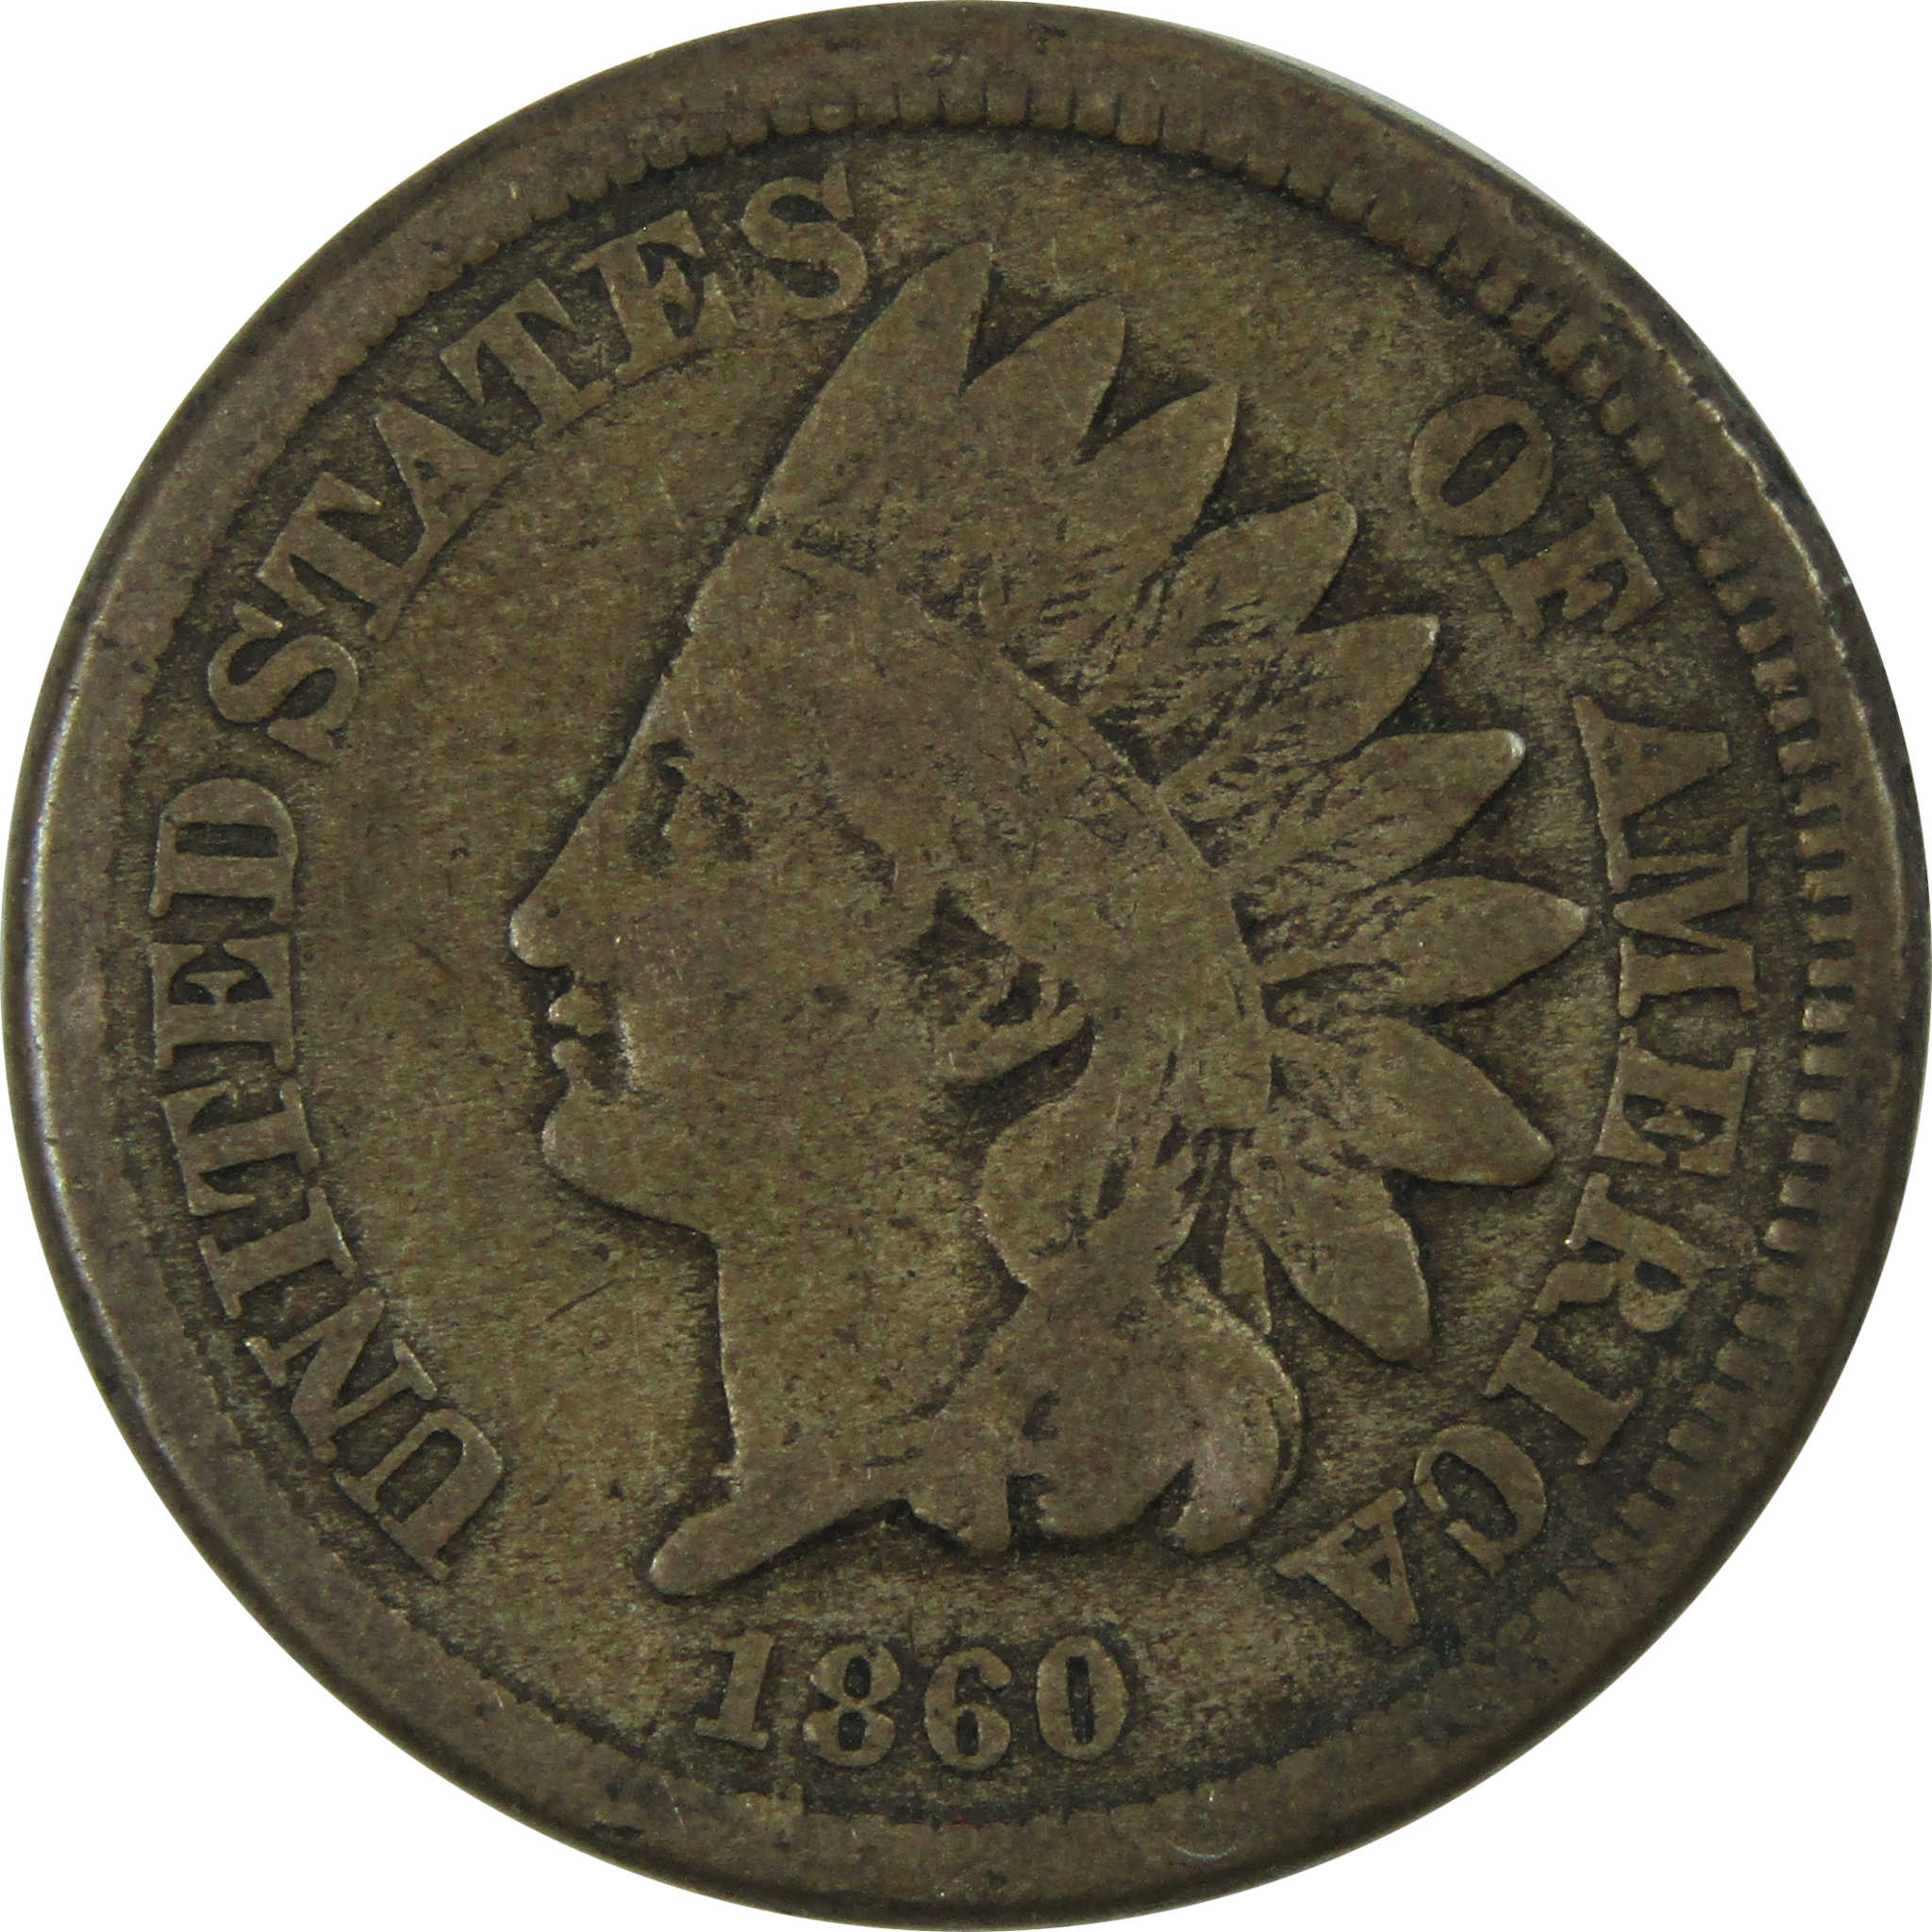 1860 Indian Head Cent VG Very Good Copper-Nickel Penny 1c SKU:I12422